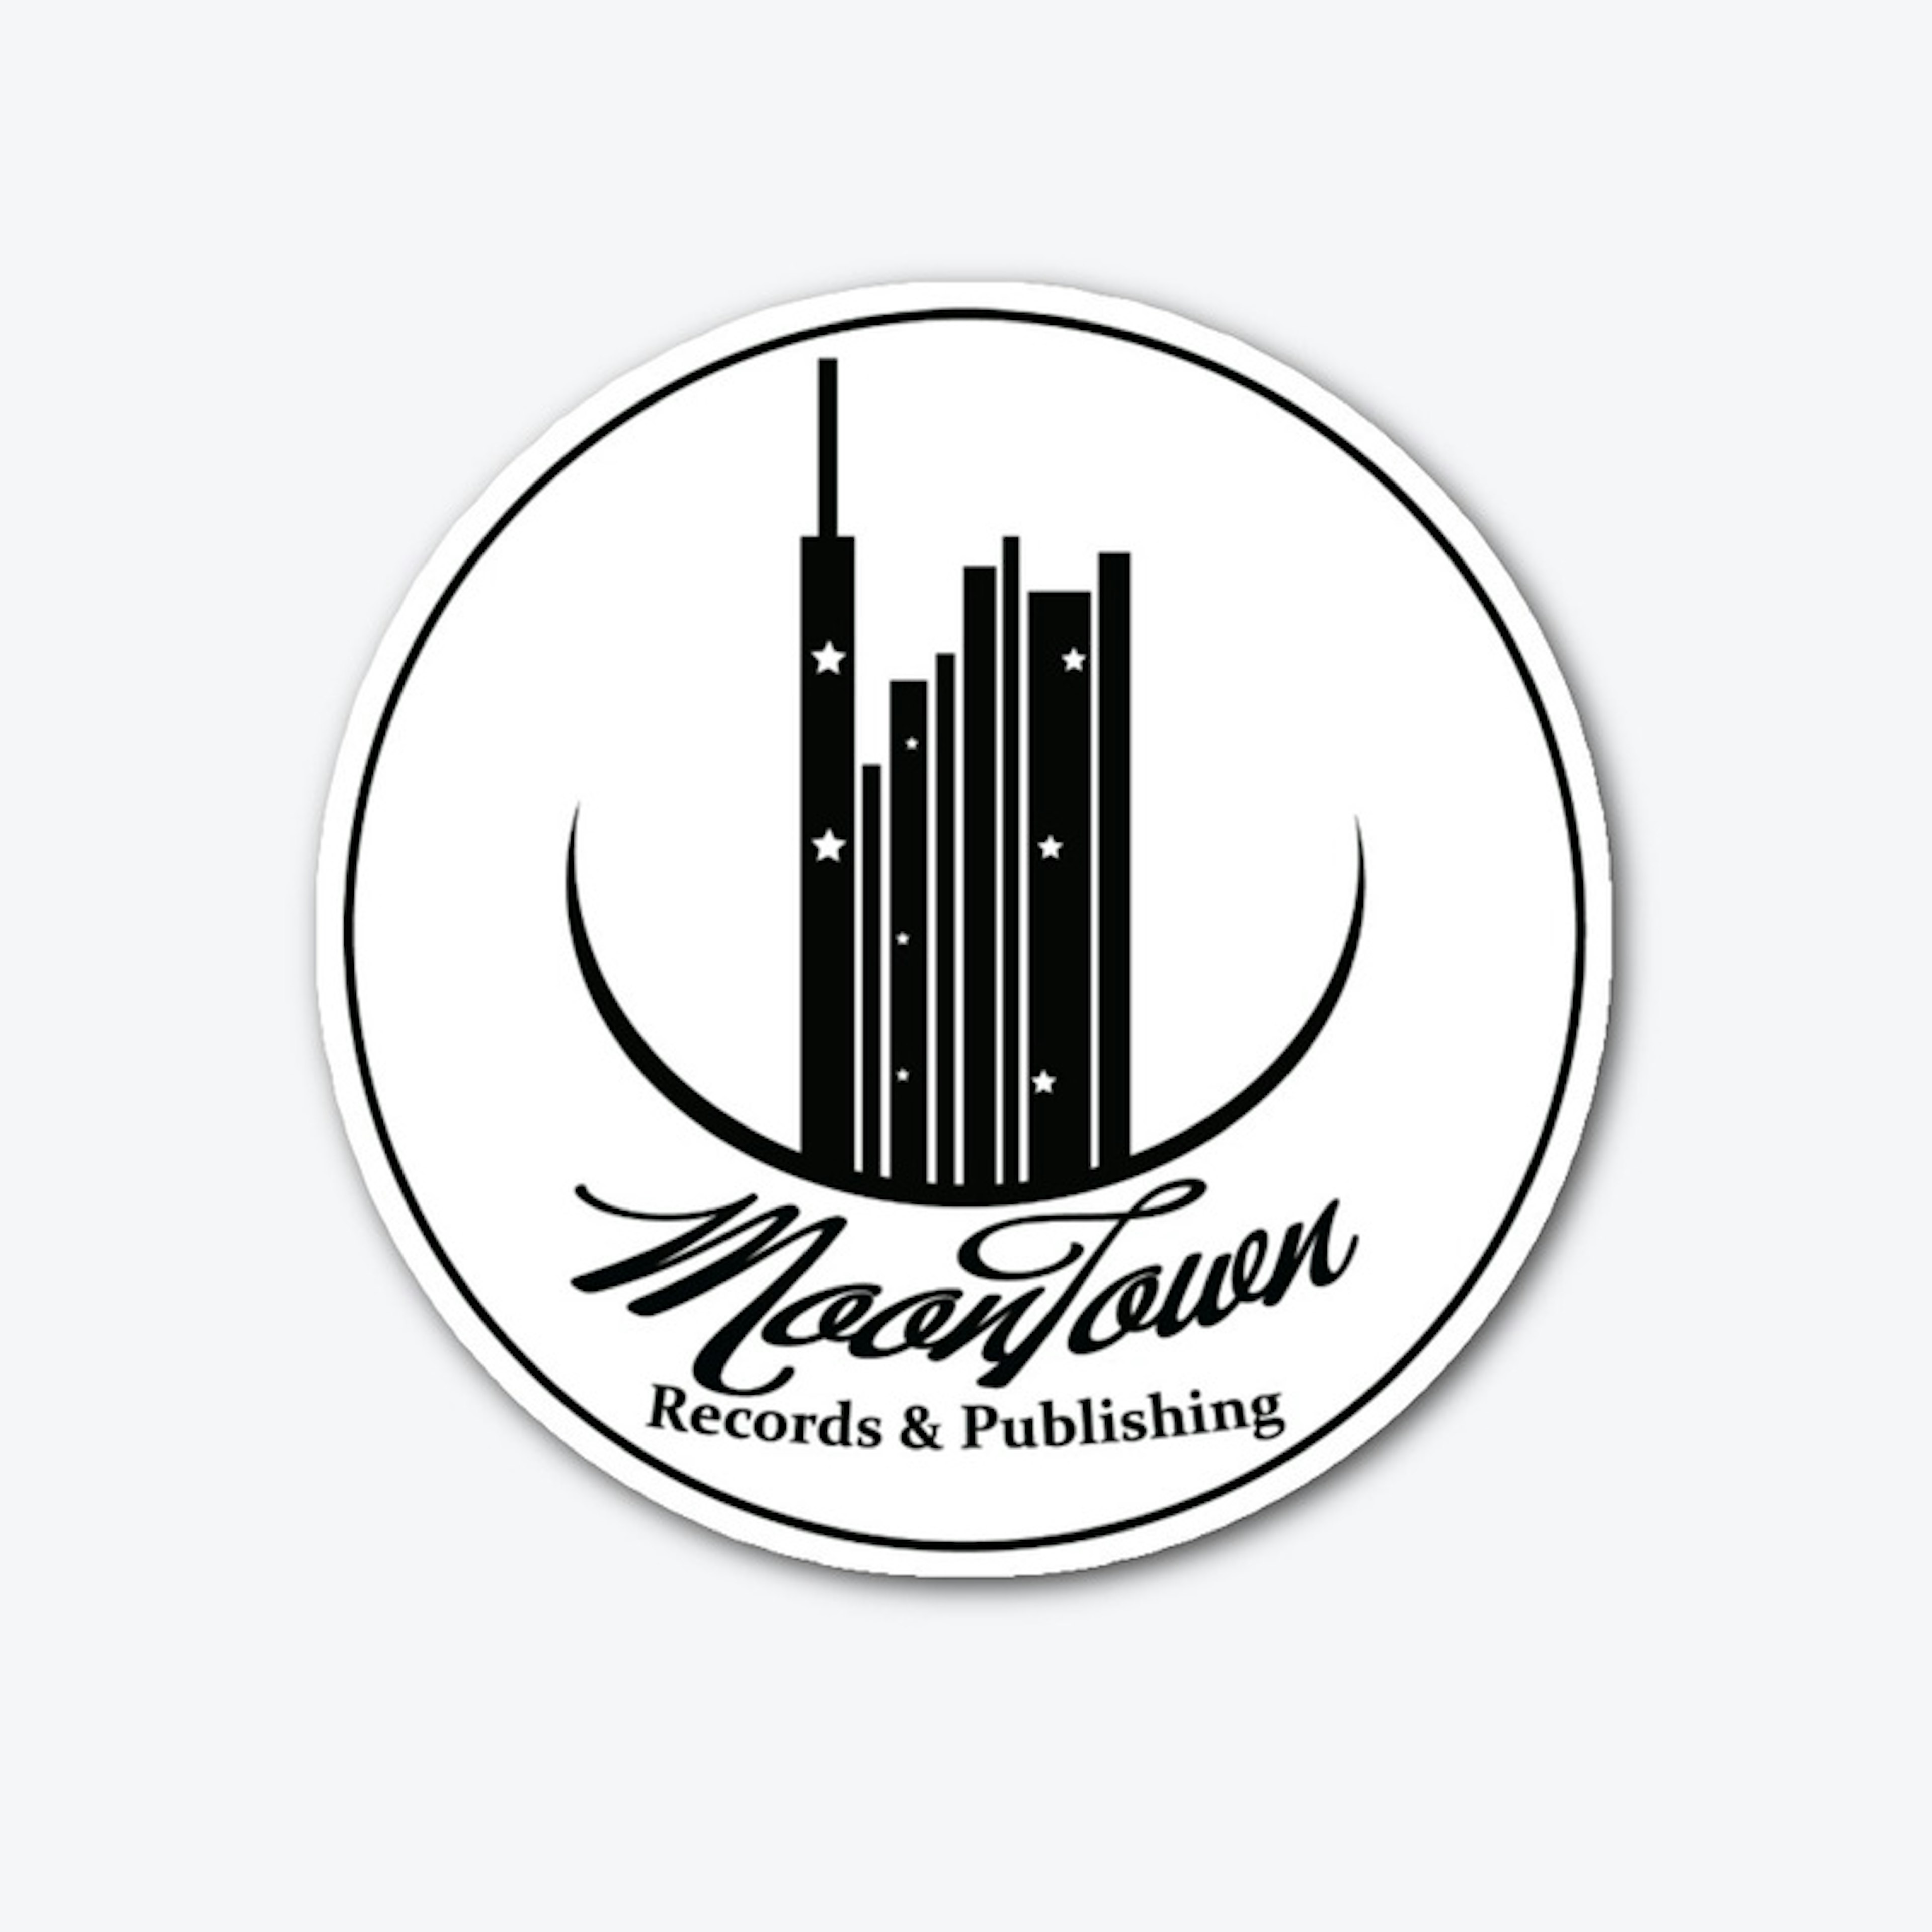 MoonTown Records & Publishing Sticker